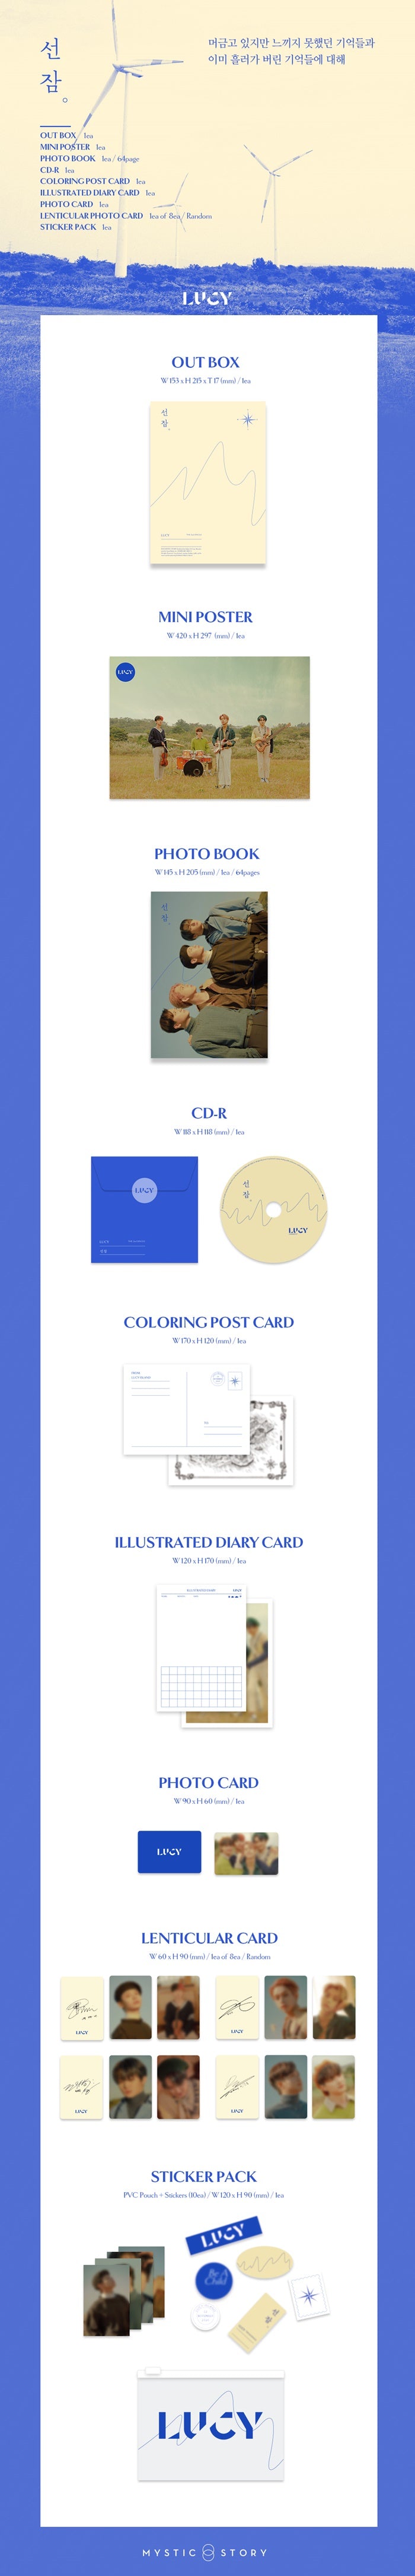 1 CD
1 Mini Poster
1 Photo Book (64 pages)
1 Postcard
1 Diary Card
1 Photo Card
1 Lenticular
1 Sticker Pack